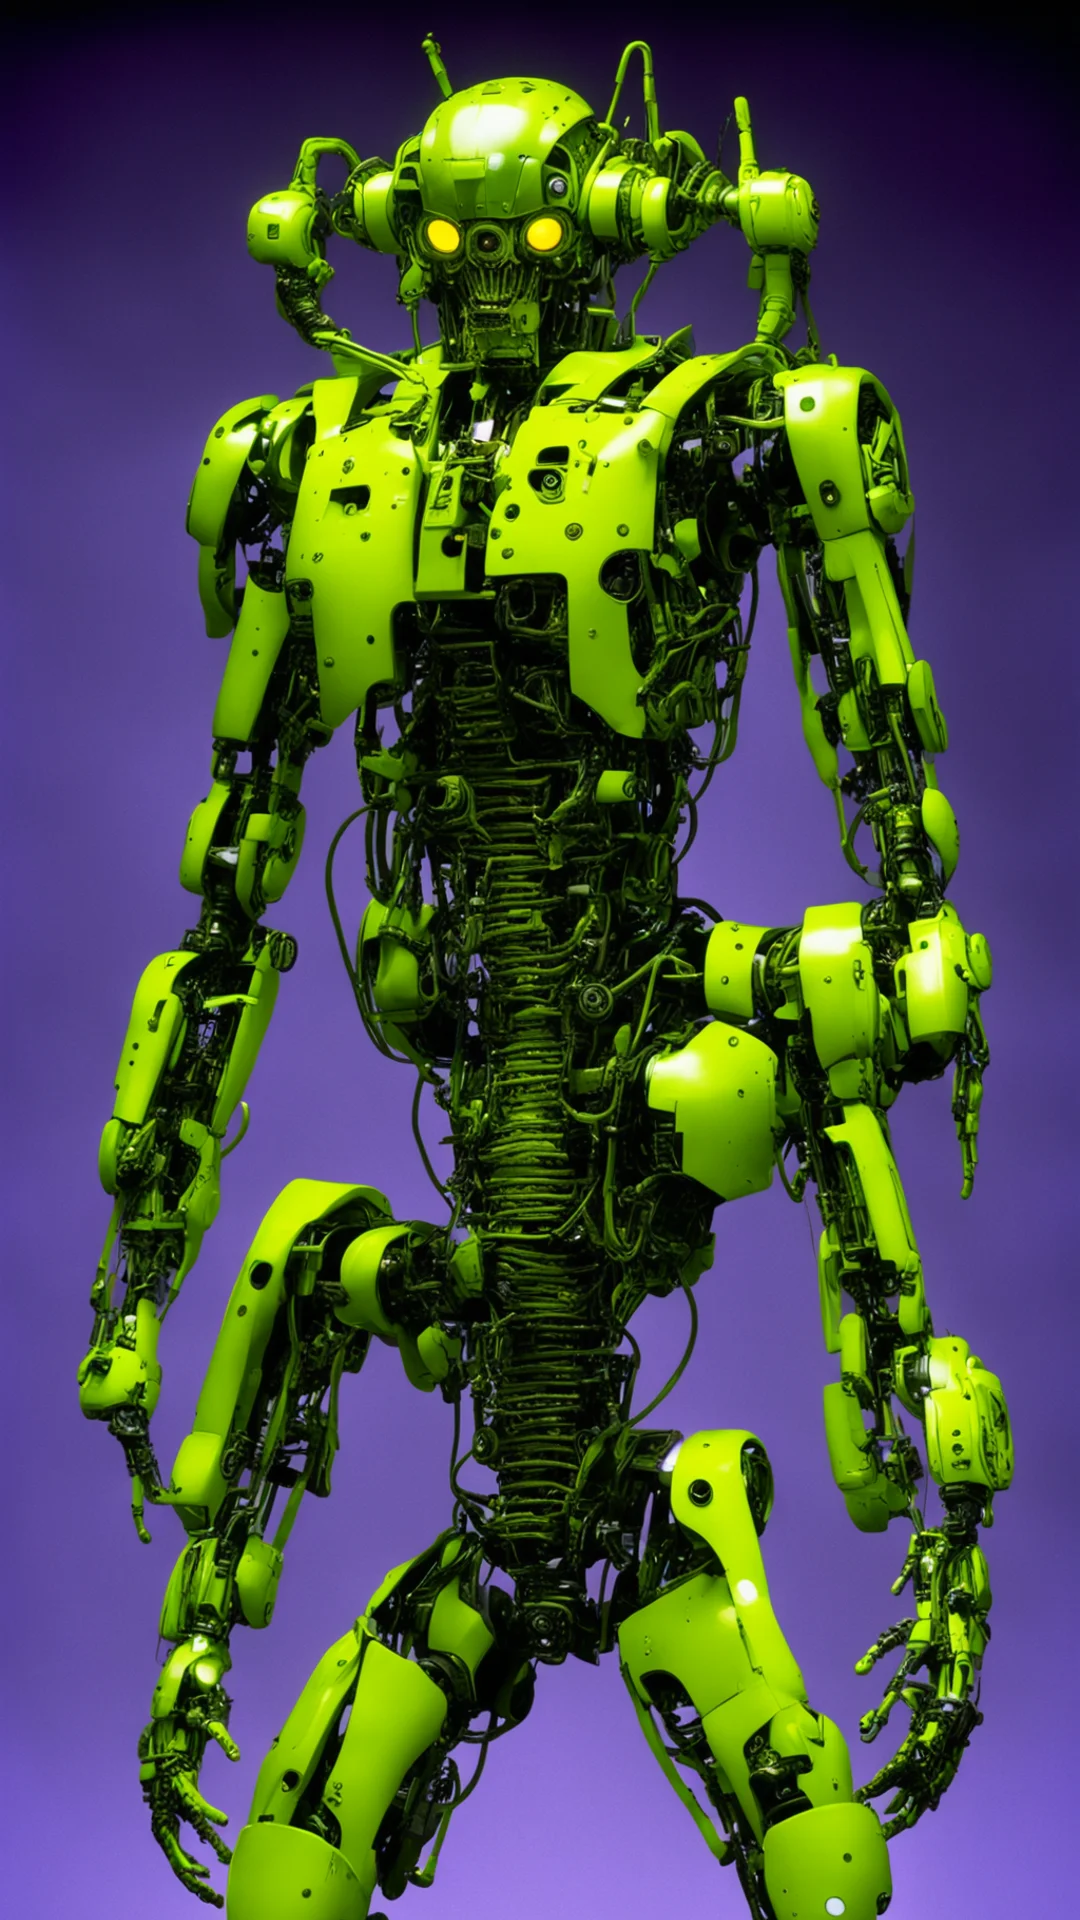 from movie event horizon 1997 from movie virus 1999 show glowing yellow green eyed multiple handed humanoid monster robots made of machine parts and flesh render amazing awesome portrait 2 tall